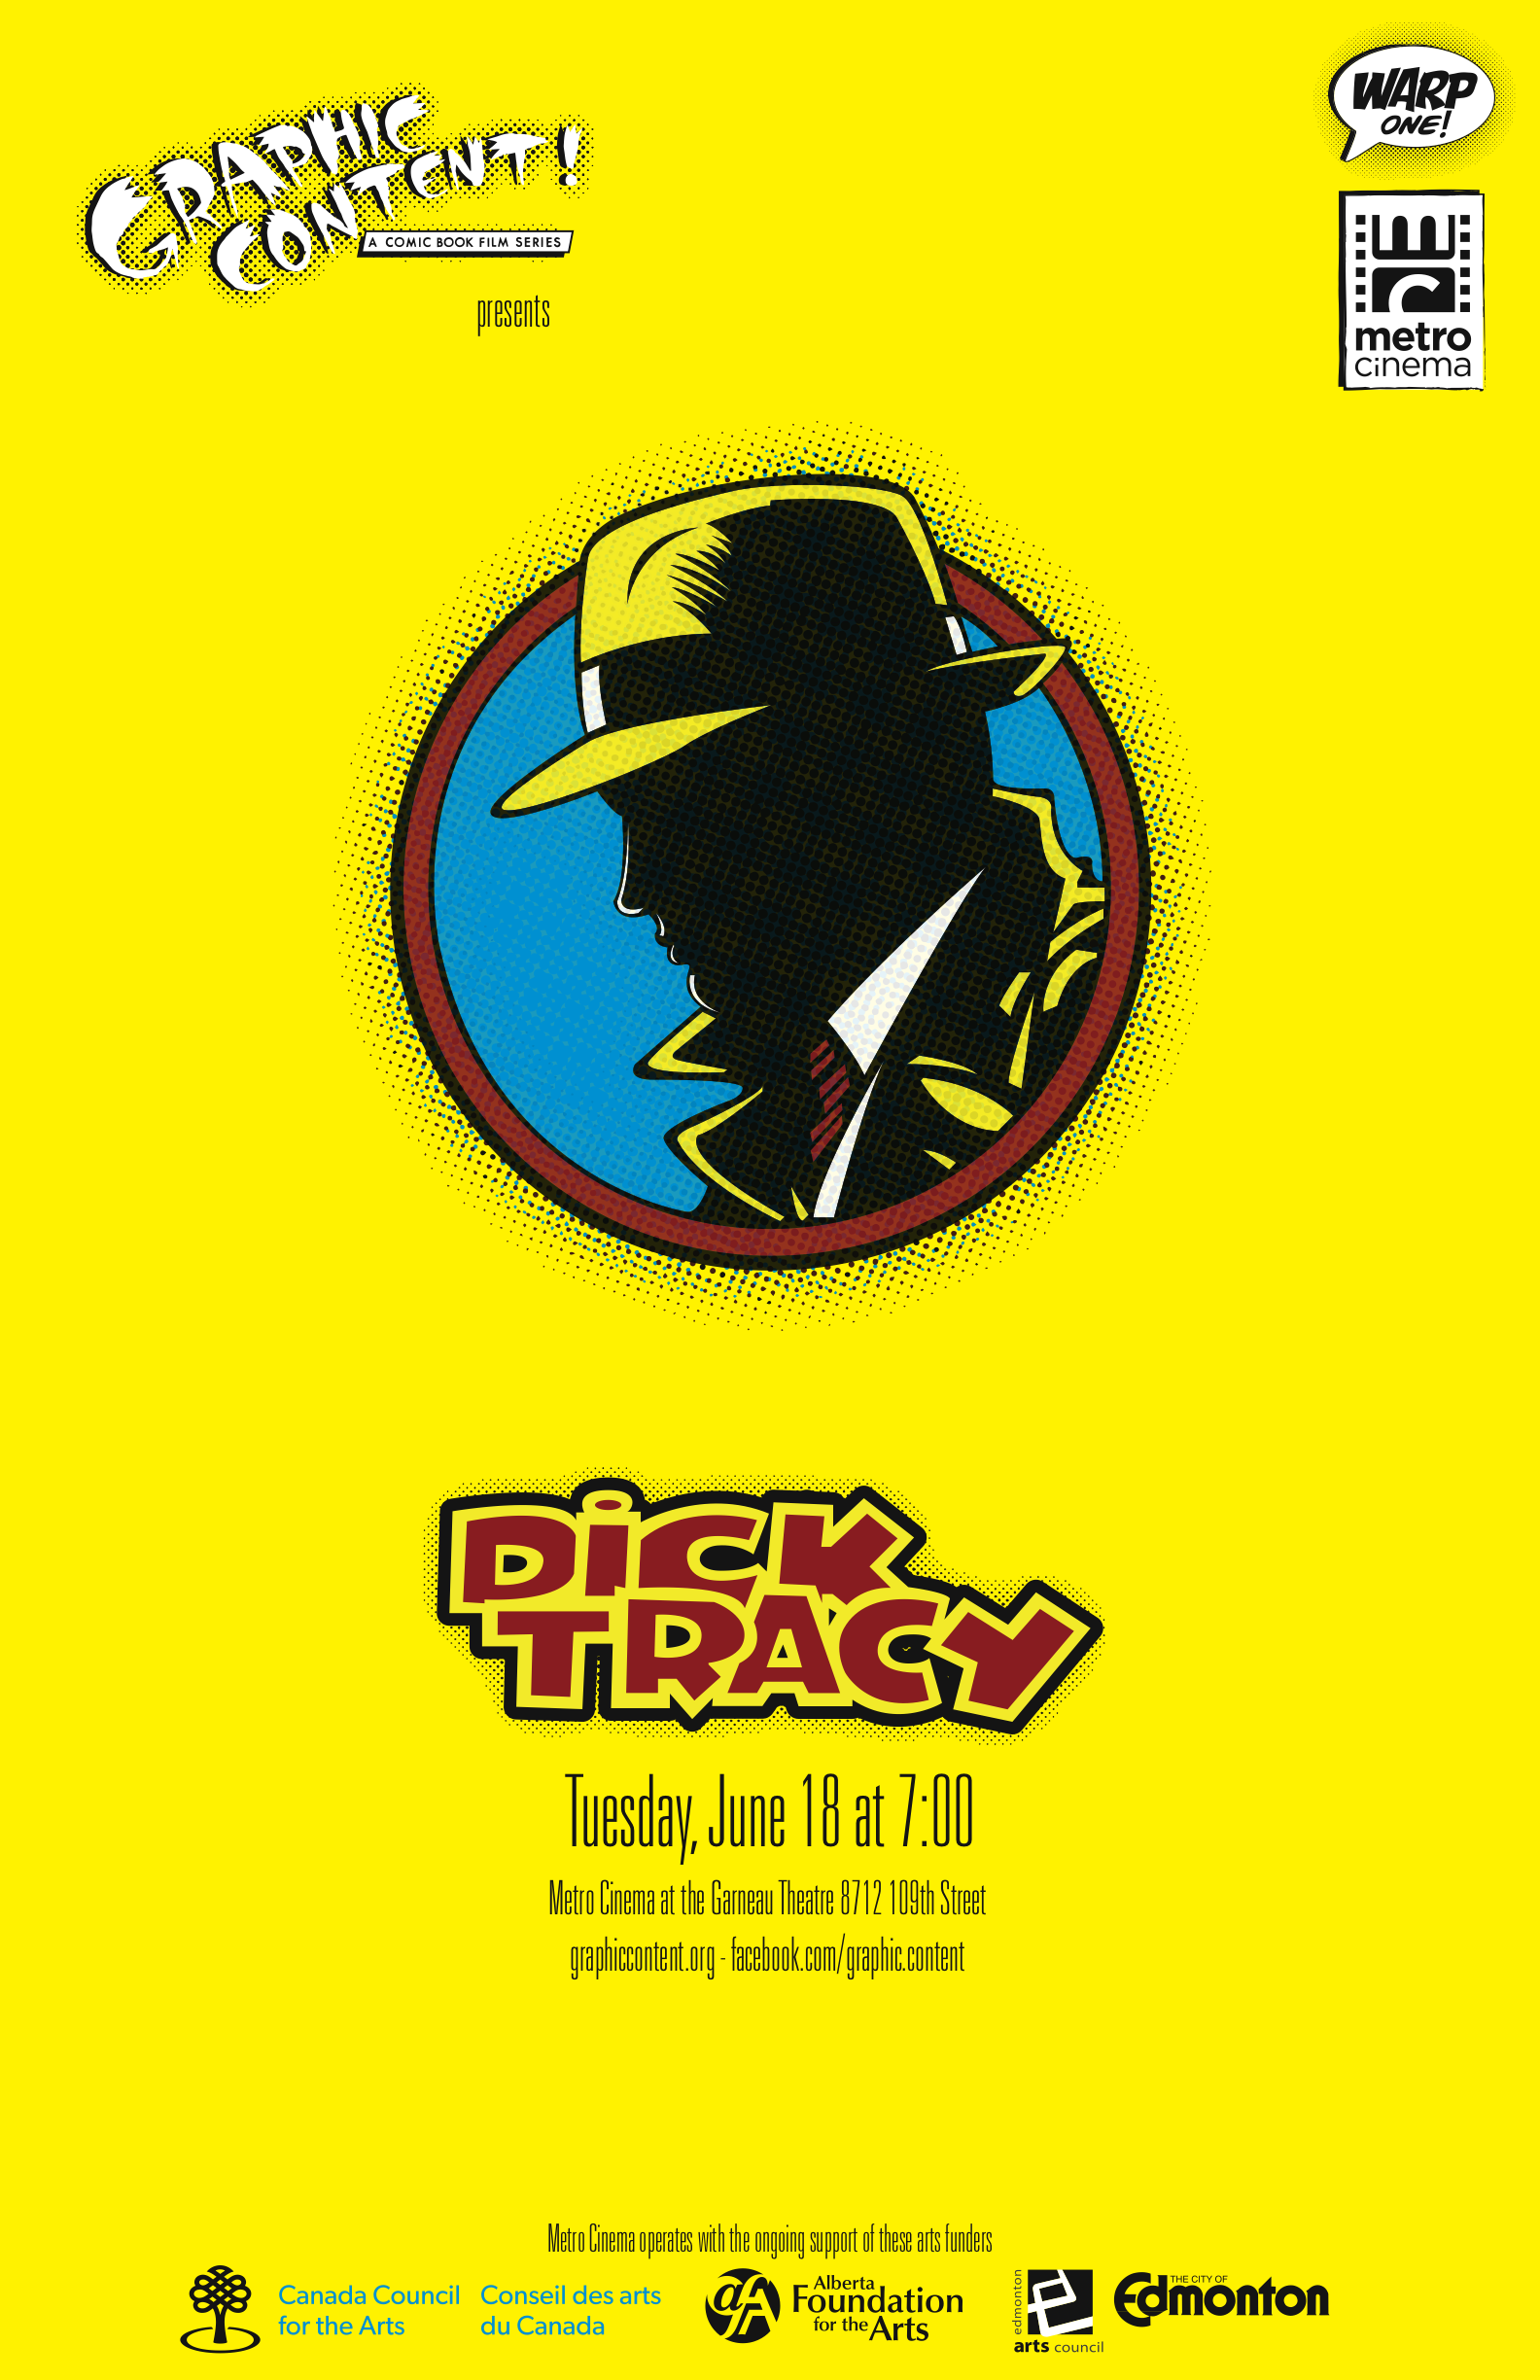 Mobsters and Material Girls with Dick Tracy!. Graphic Content! Edmonton's Monthly Comic Book Film Series